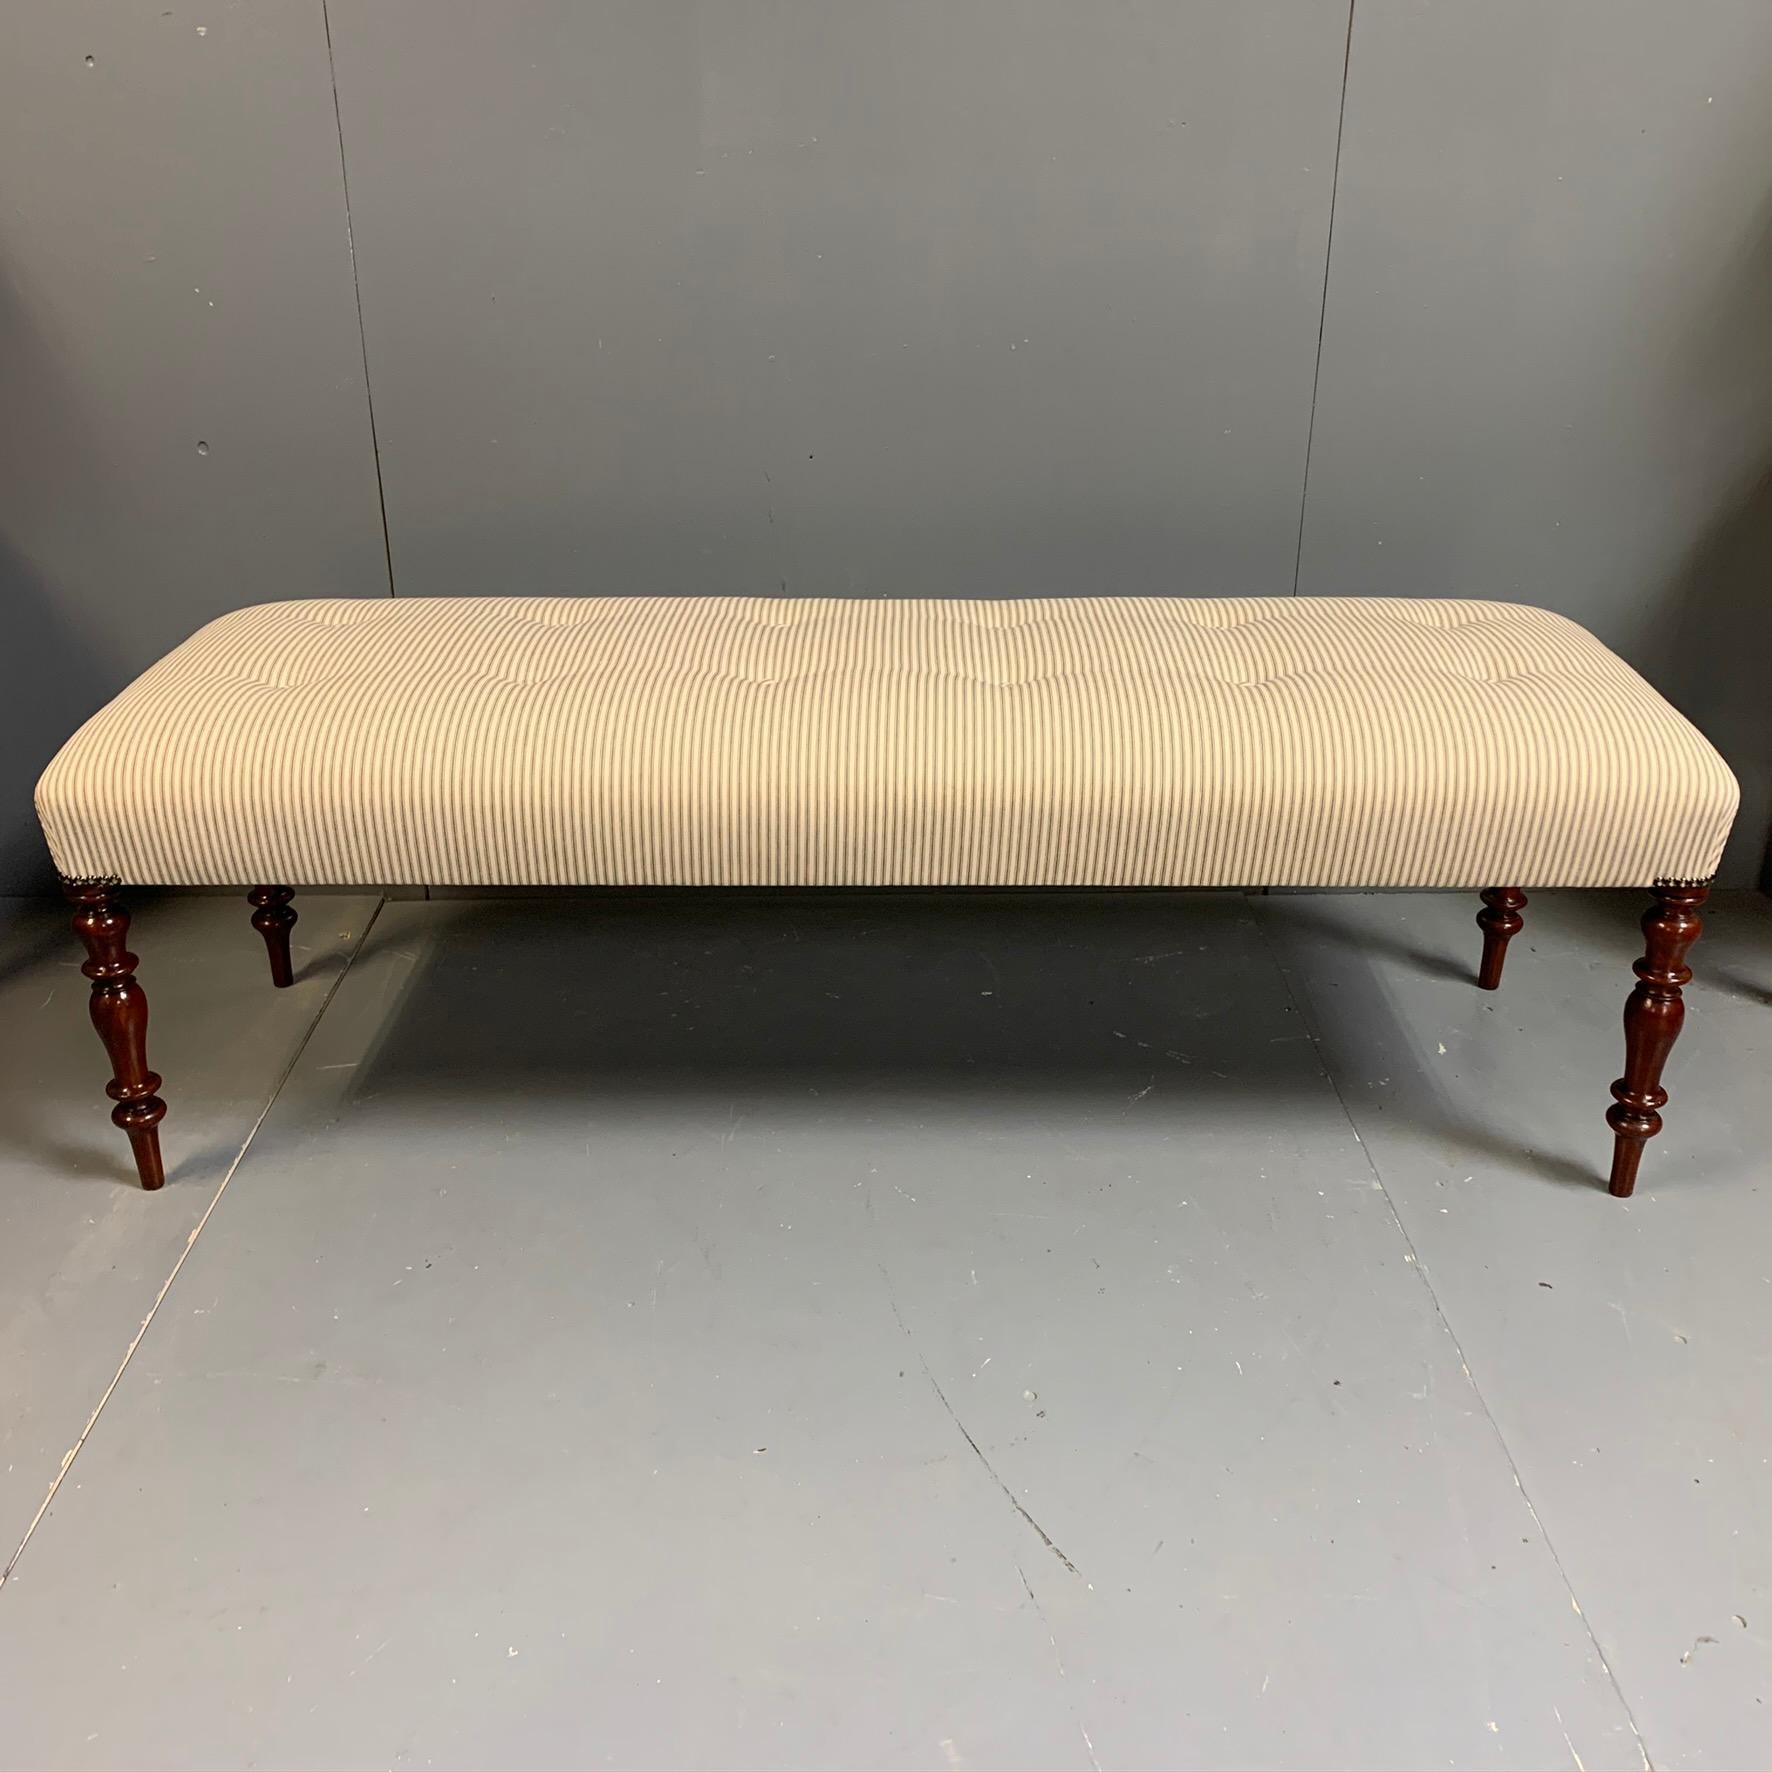 Fully restored and reconstructed Regency long stool in mahogany, fully re upholstered in traditional blue and off white ticking, finished with a buttoned top.
Great decor piece, but also gives useful occasional seating for three adults if